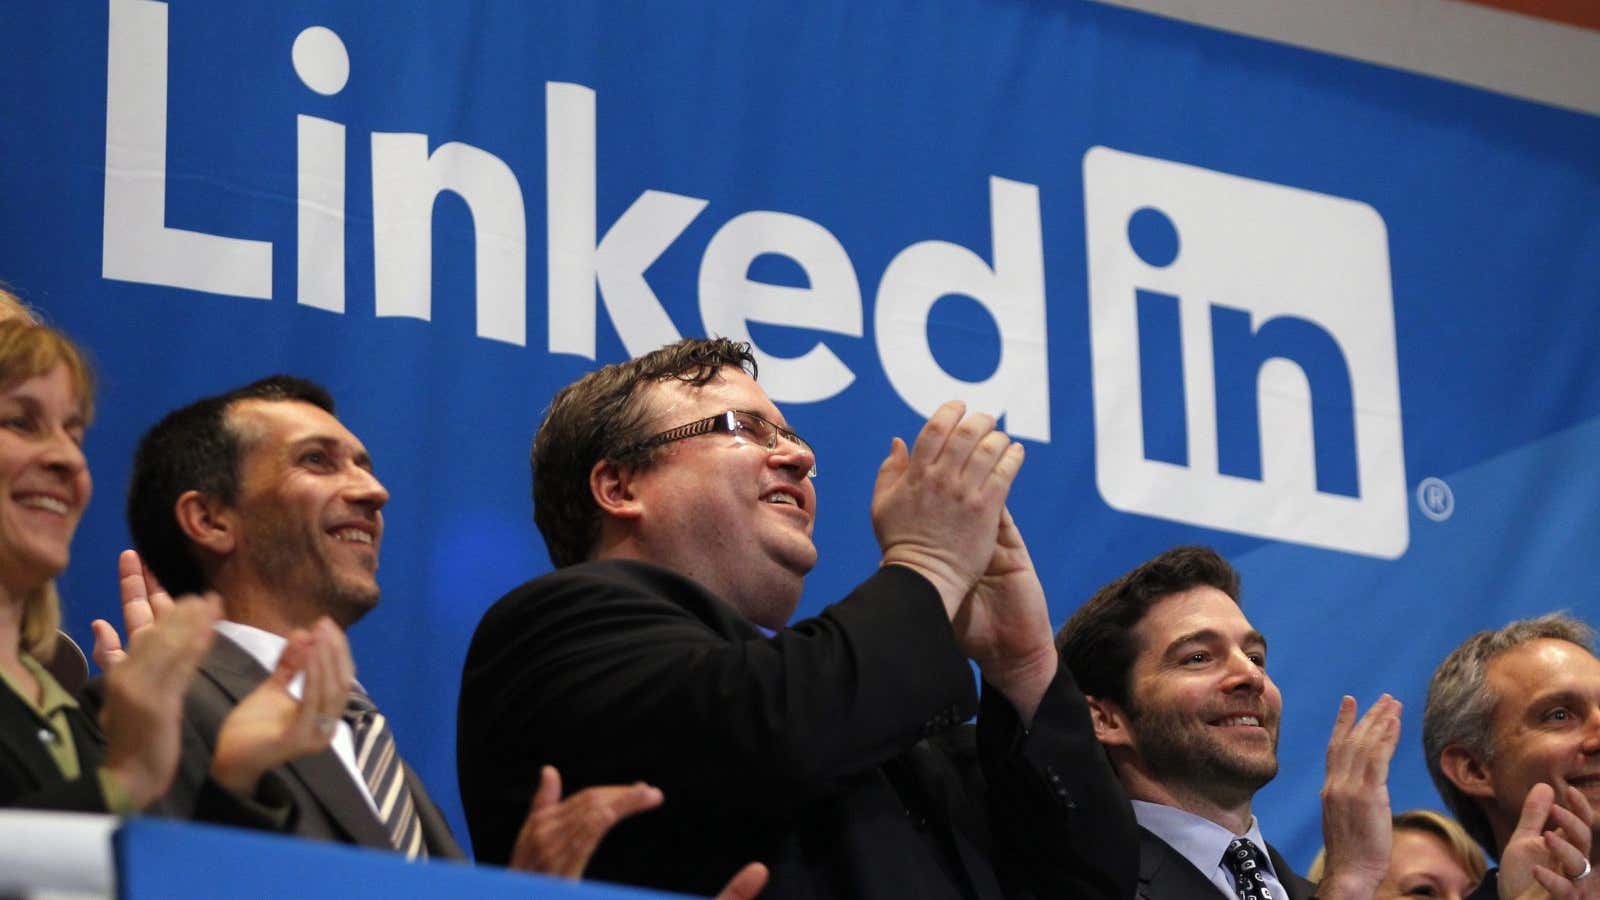 LinkedIn doesn’t have to make sense to us. It just is.